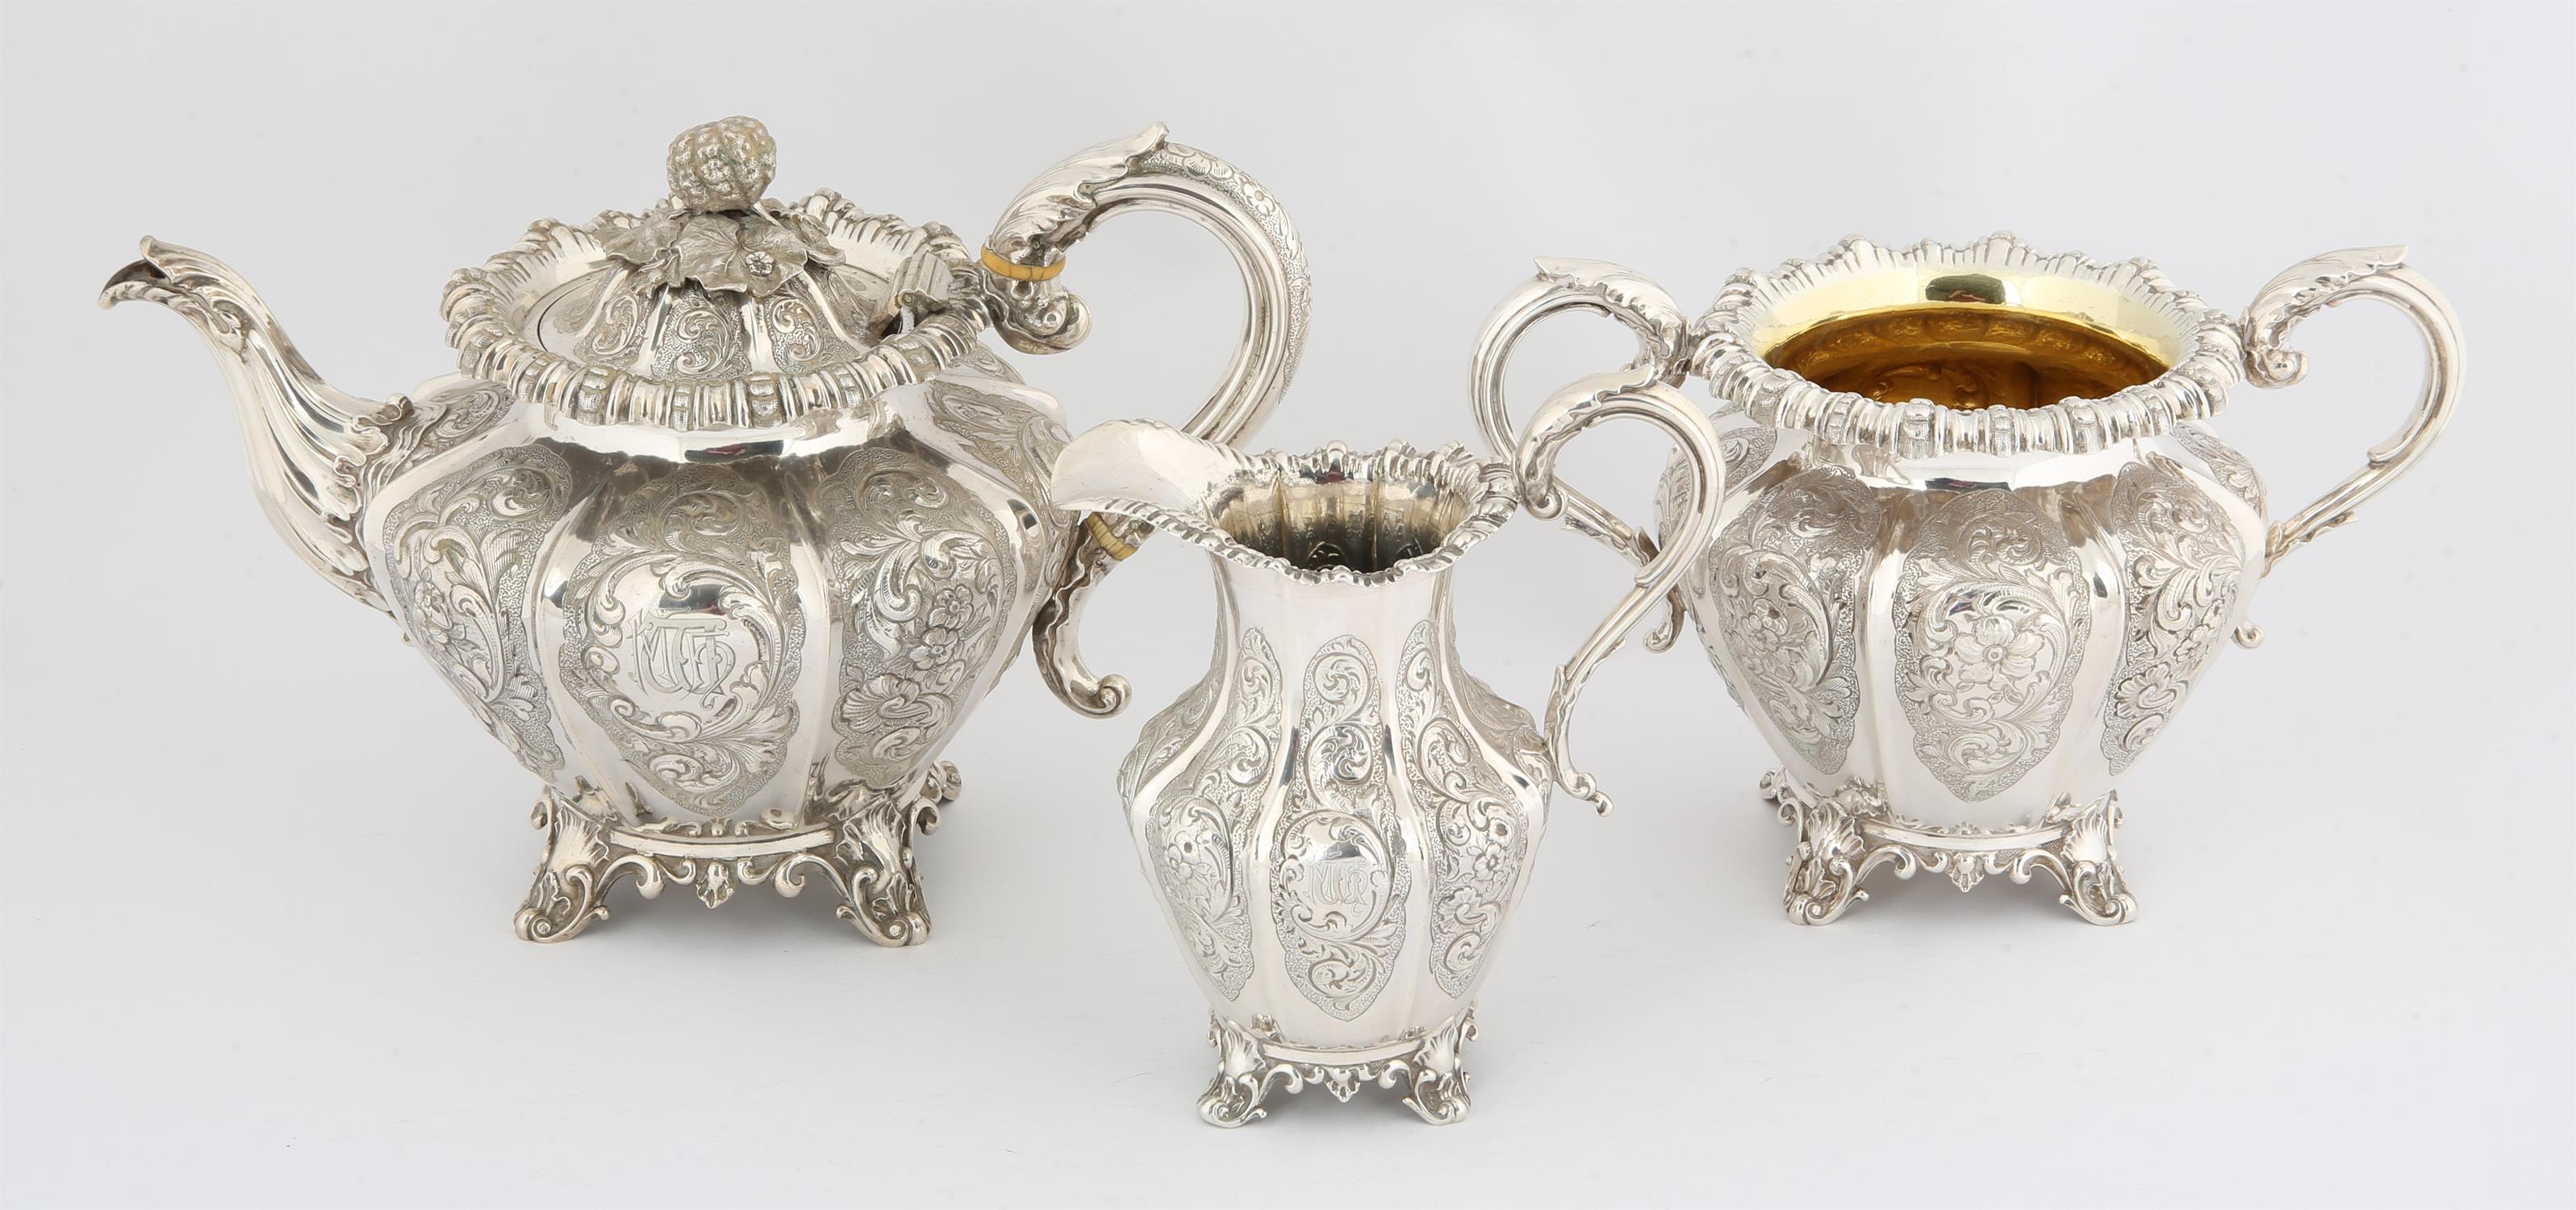 Victorian silver good quality three piece tea service decorated with embossed panels of flowers and - Image 5 of 6